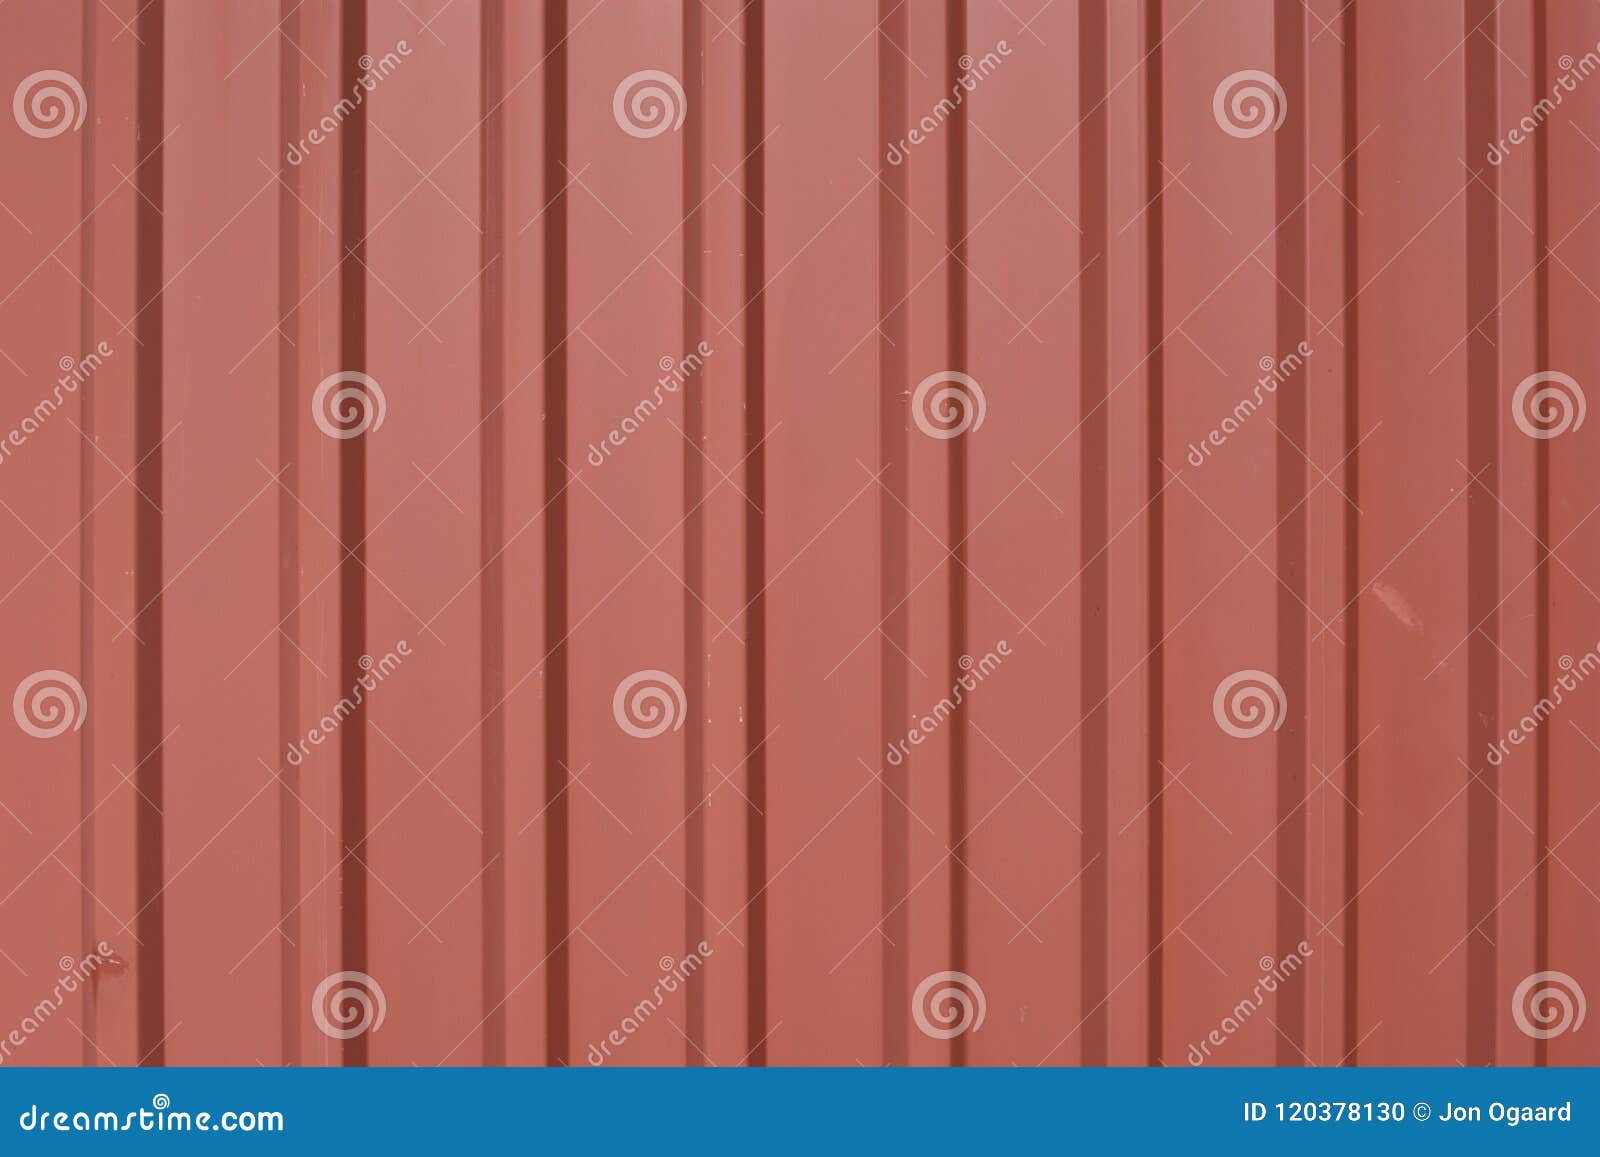 worn, corrugated trapezoidal metal panels with brick red powder coat and signs of wear and tear.